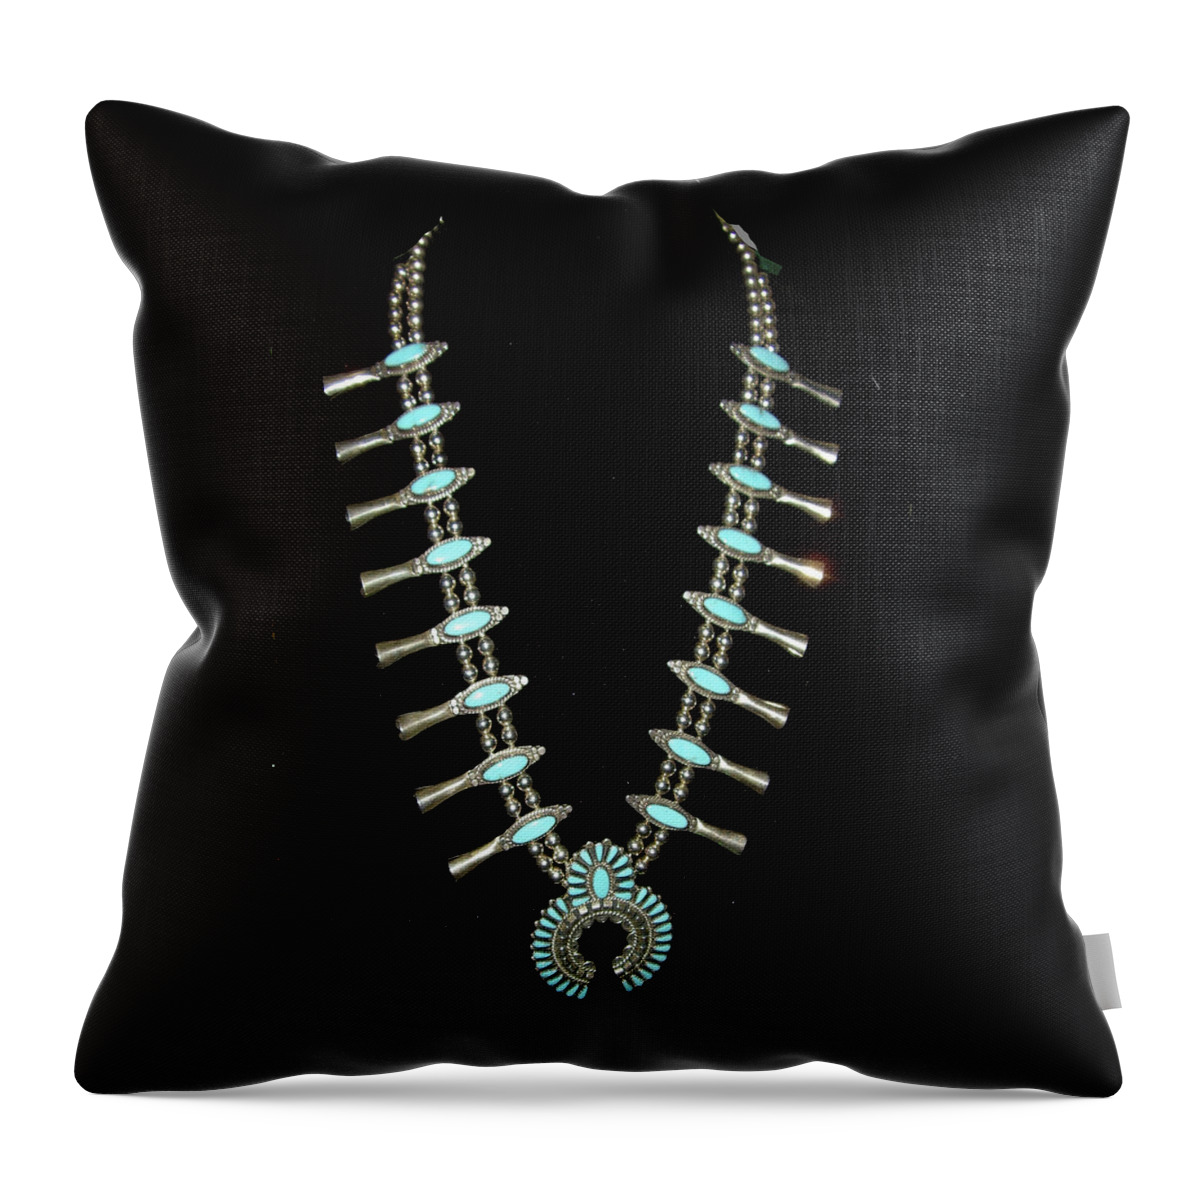 Necklace Throw Pillow featuring the photograph Squash Blossom Necklace by Nancy Ayanna Wyatt